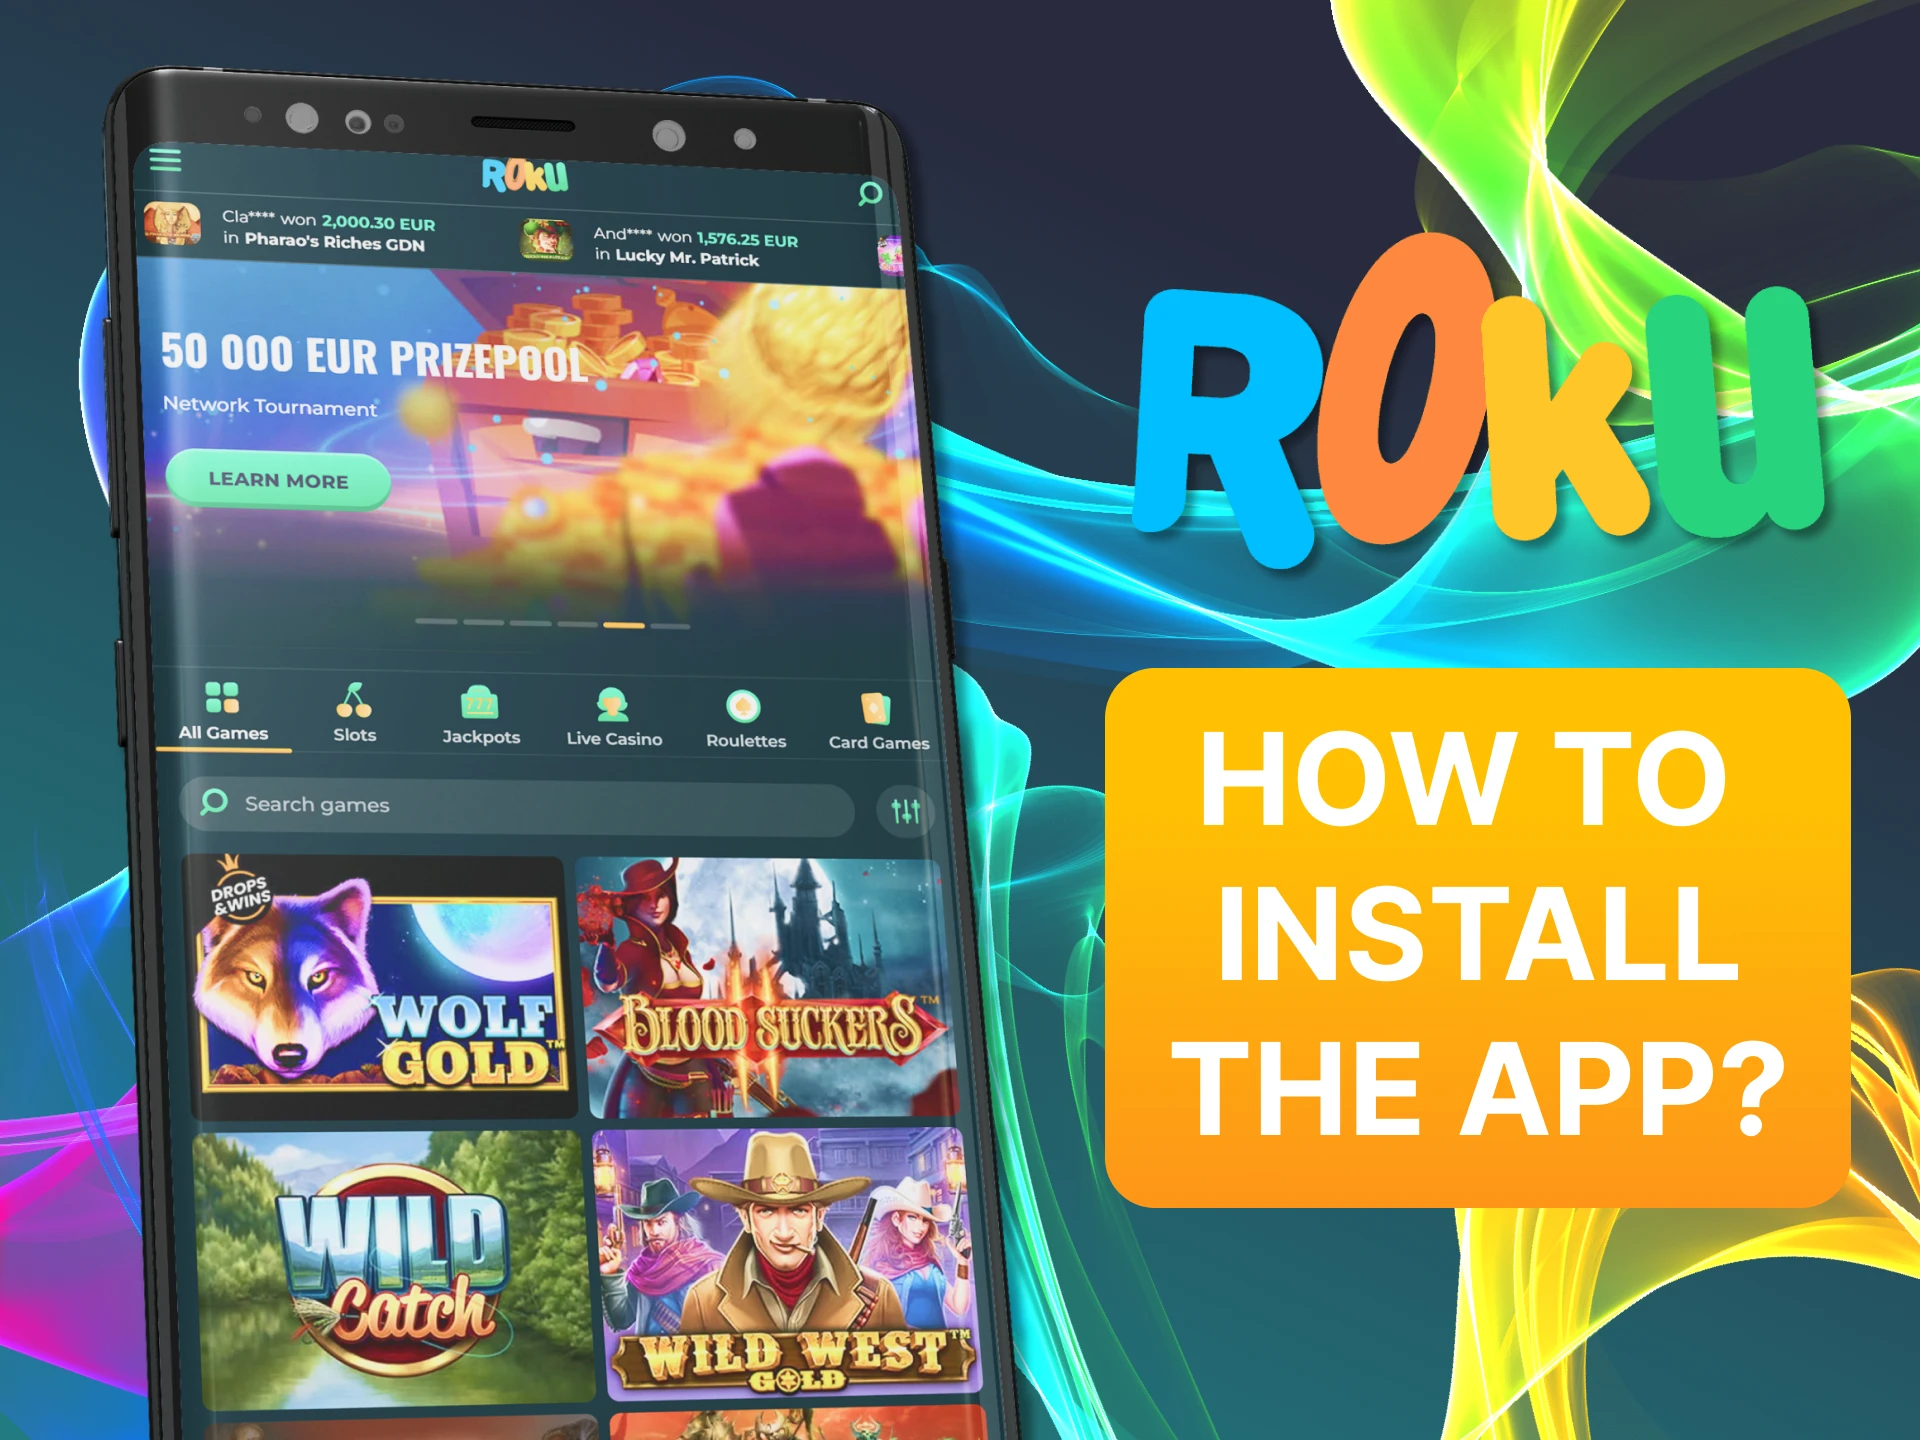 With these instructions, install the Rokubet app easily on your phone.